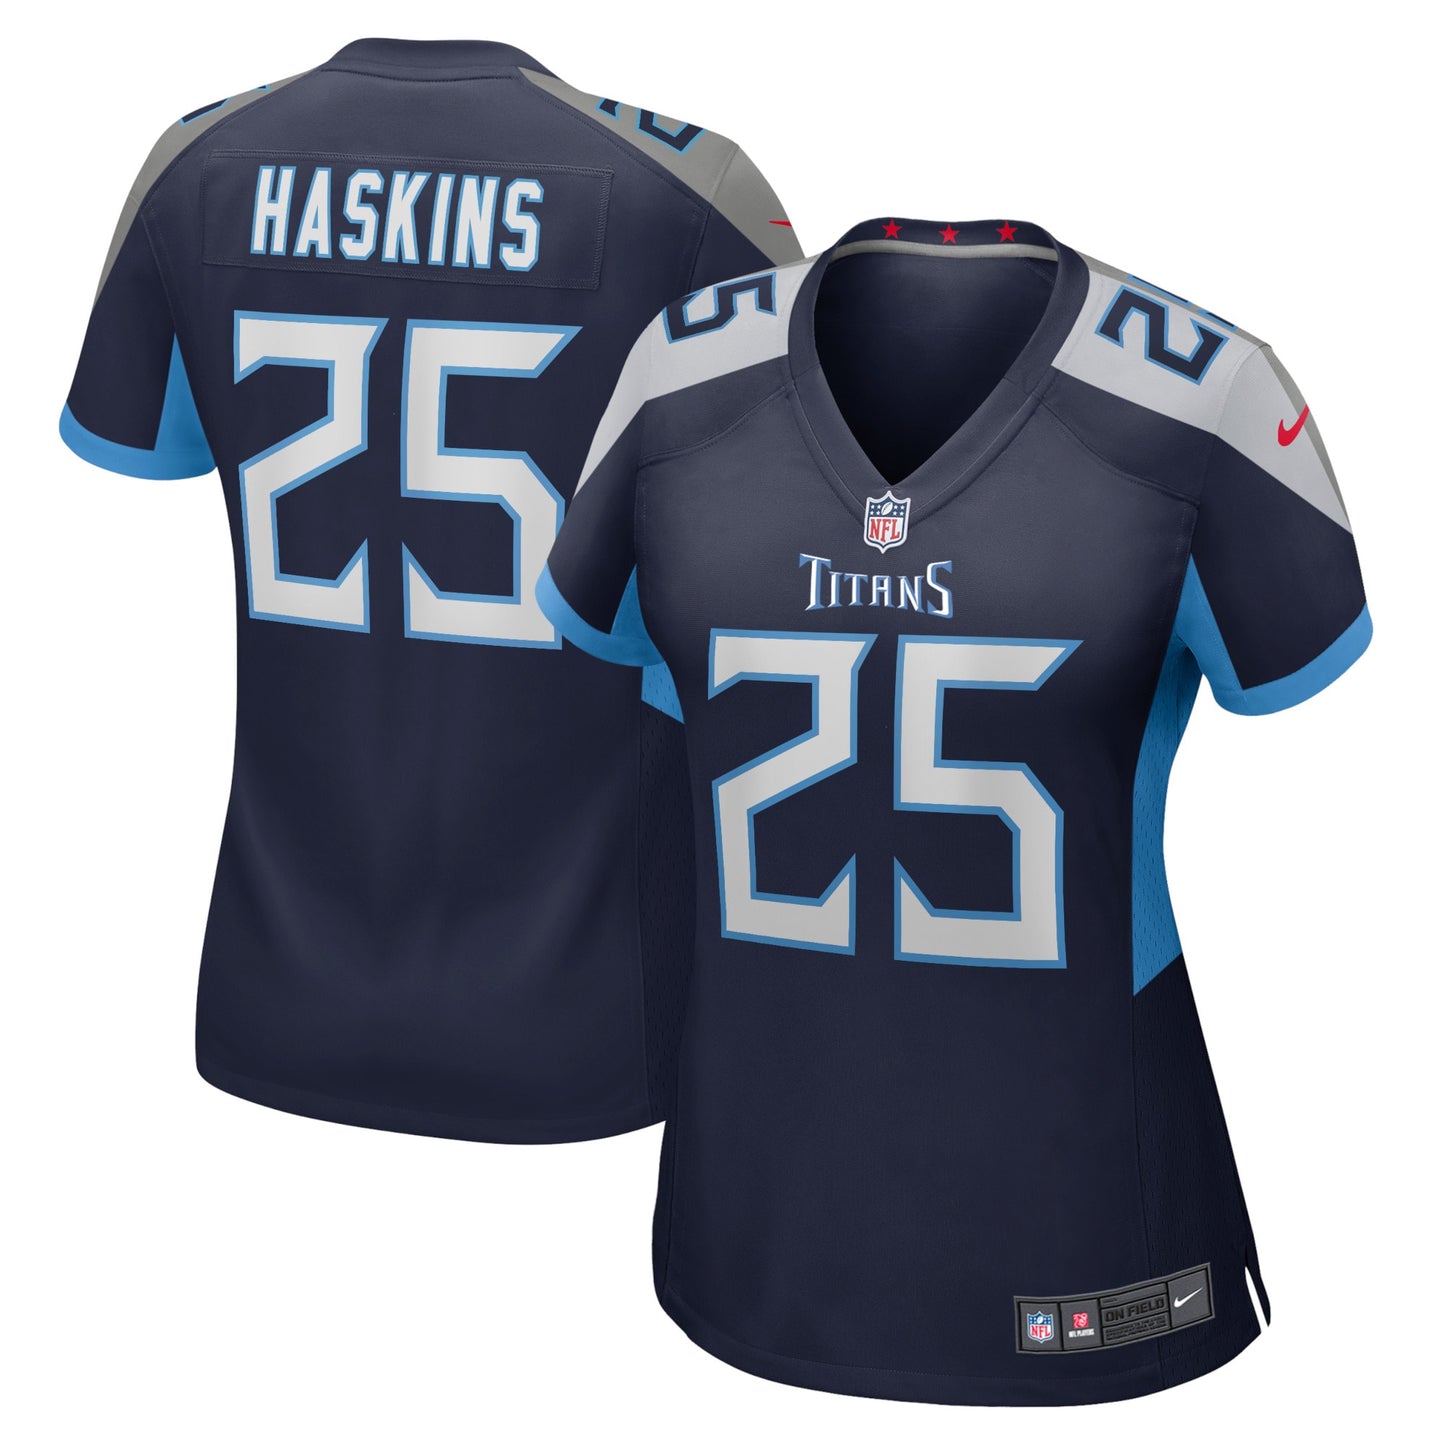 Hassan Haskins Tennessee Titans Nike Women's Player Game Jersey - Navy